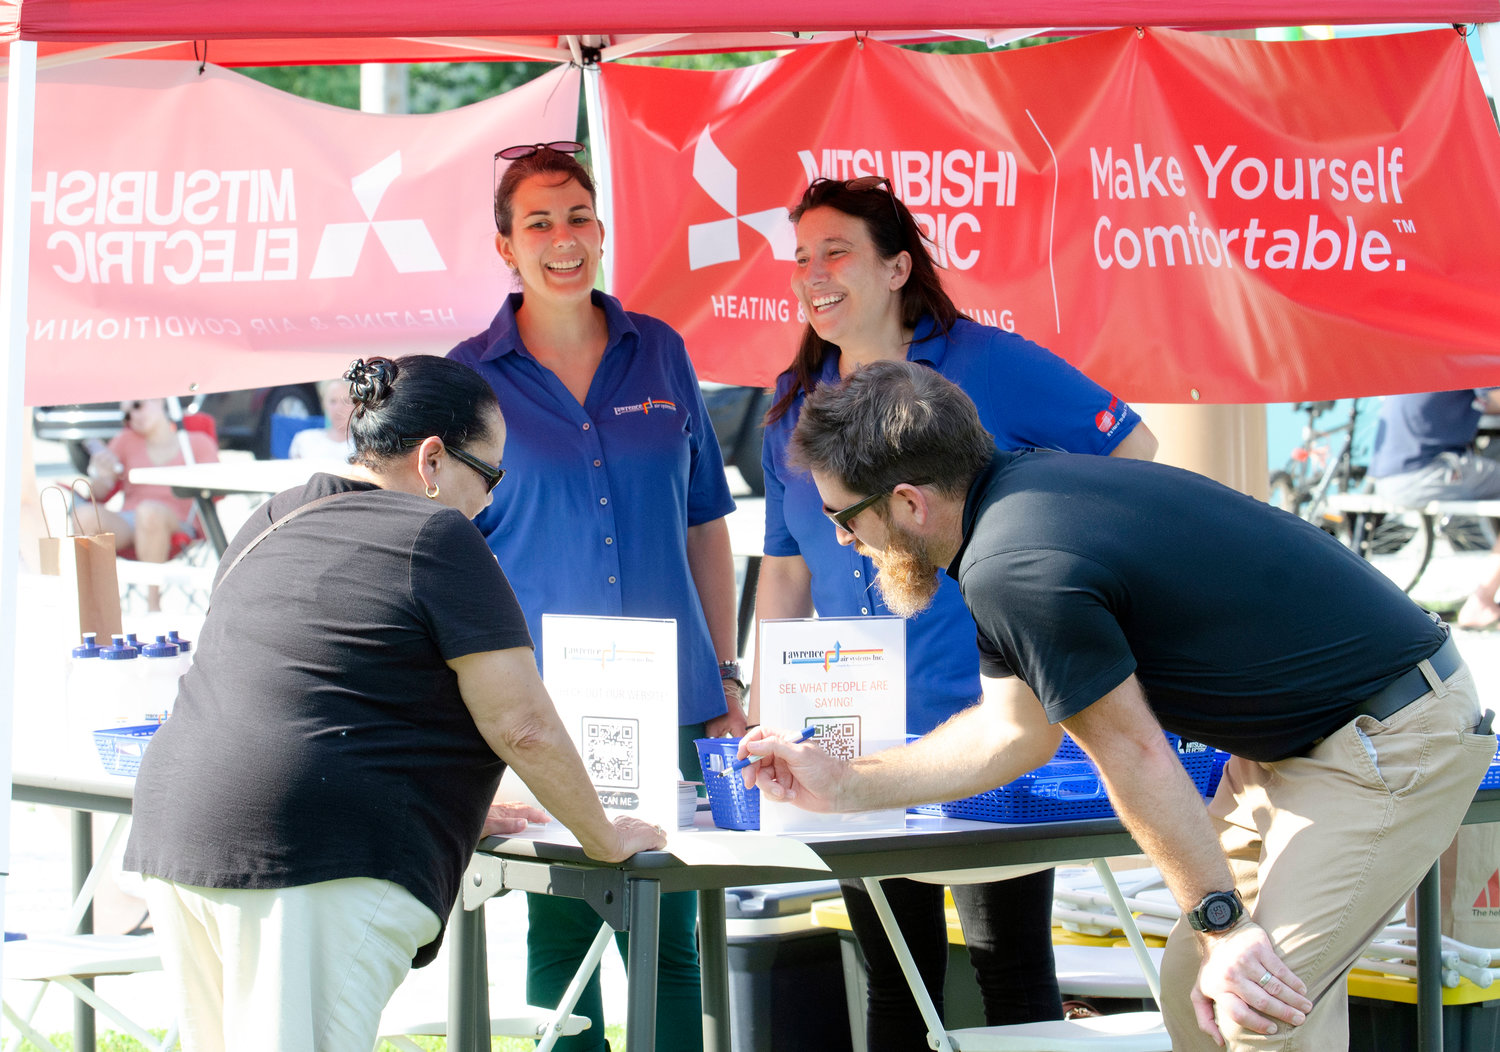 Lawrence Air Systems employees Patricia Silvia (mid left), Tricia Goulart and Aaron Lawrence chat with customer, Cecilia Lowell (left) during last Friday's block party at Police Cove Park.